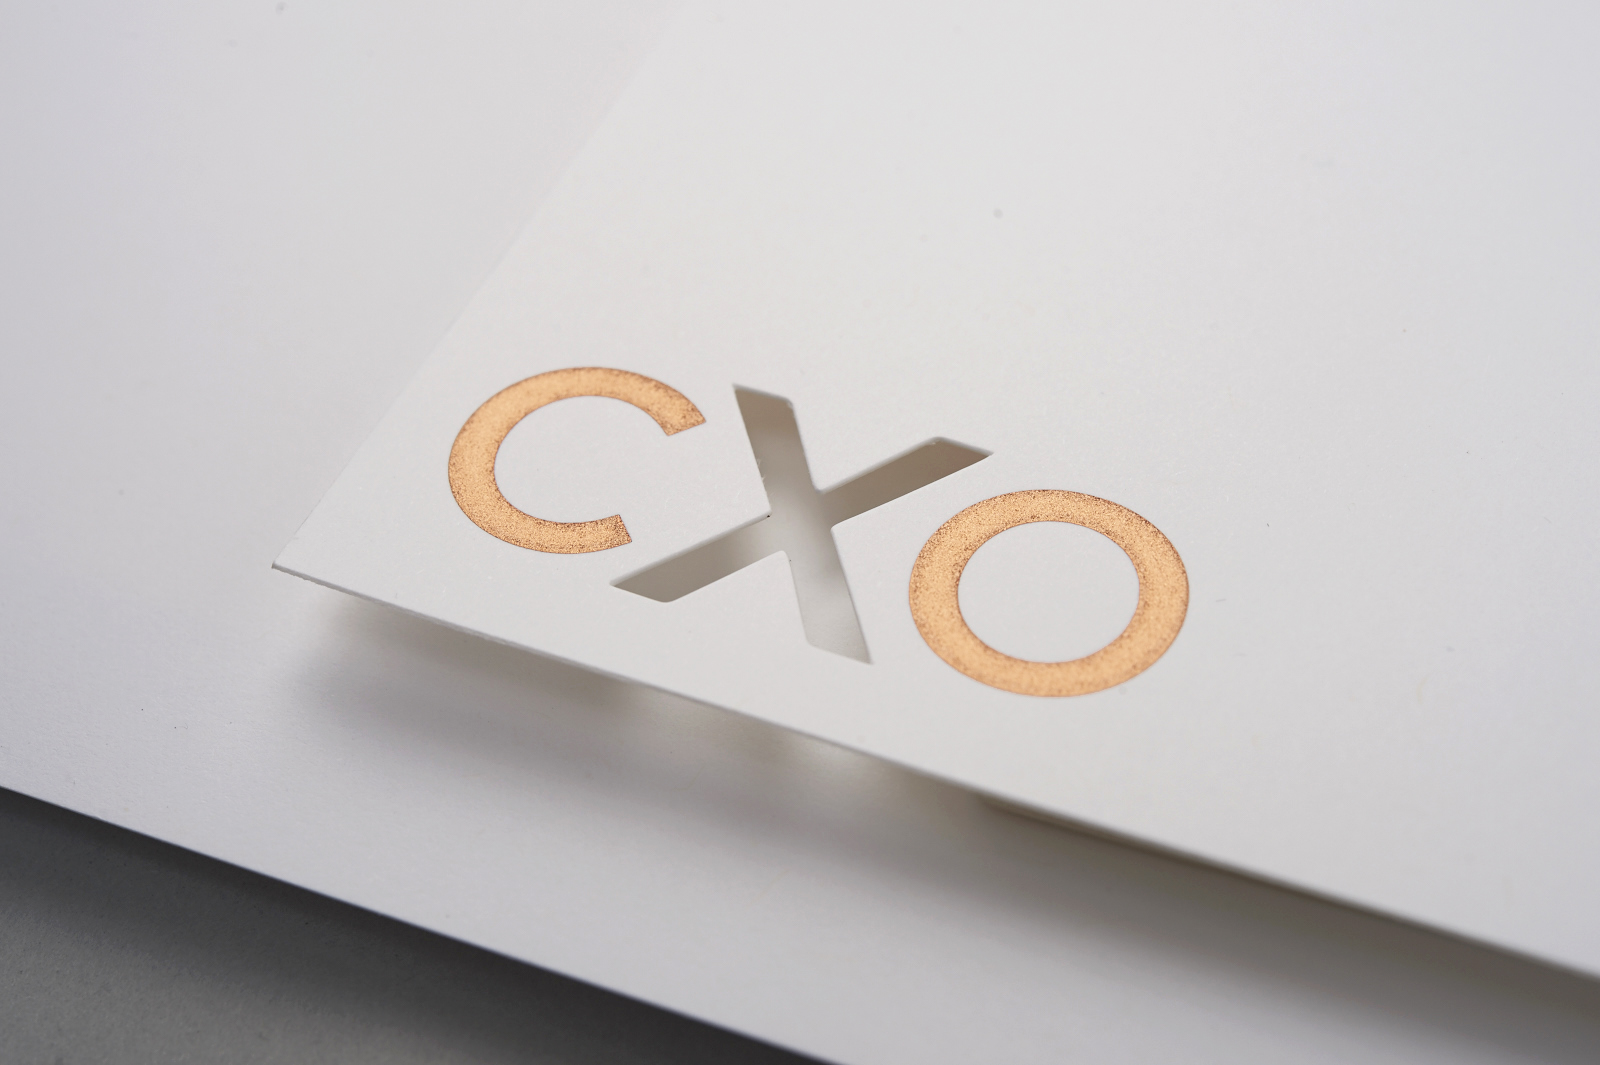 CXO logo die-cut and engraved showing a textural elegant brand design